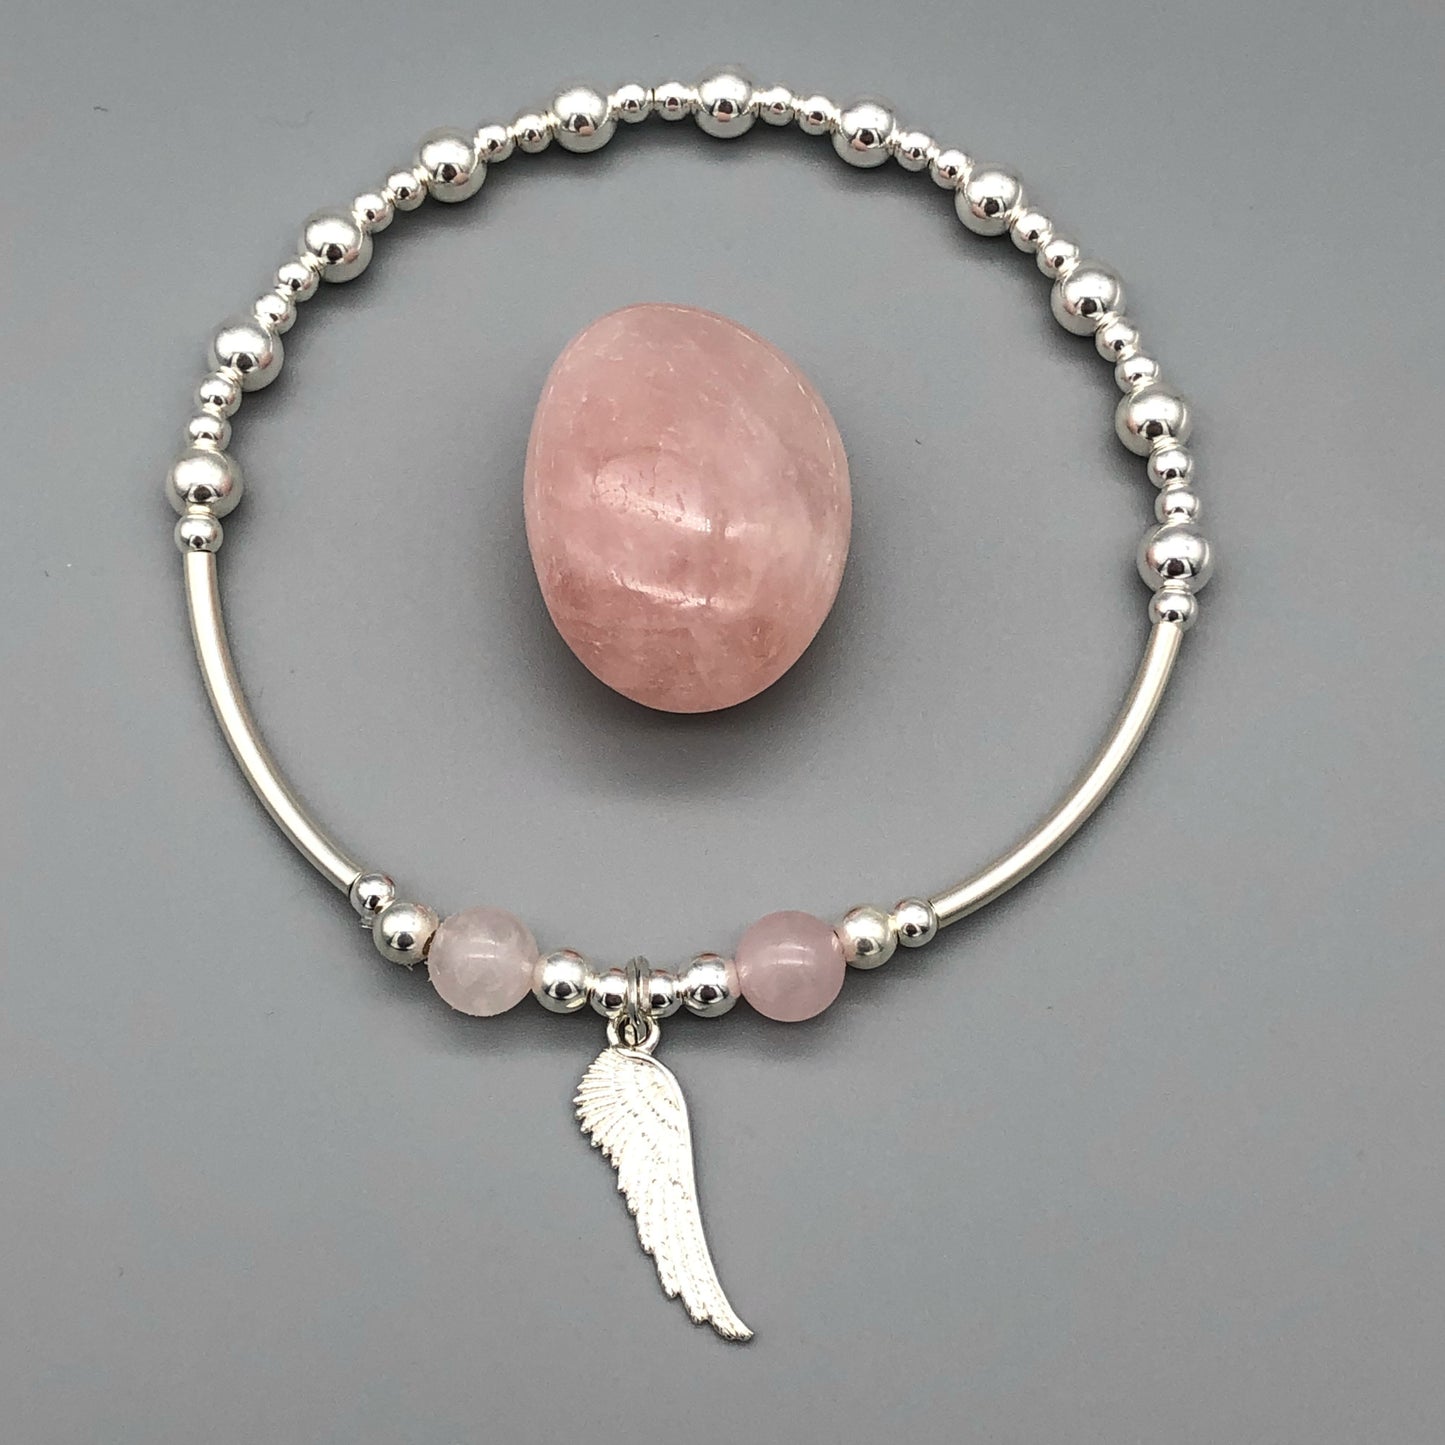 Angel wing charm & rose quartz sterling silver stacking bracelet by My Silver Wish